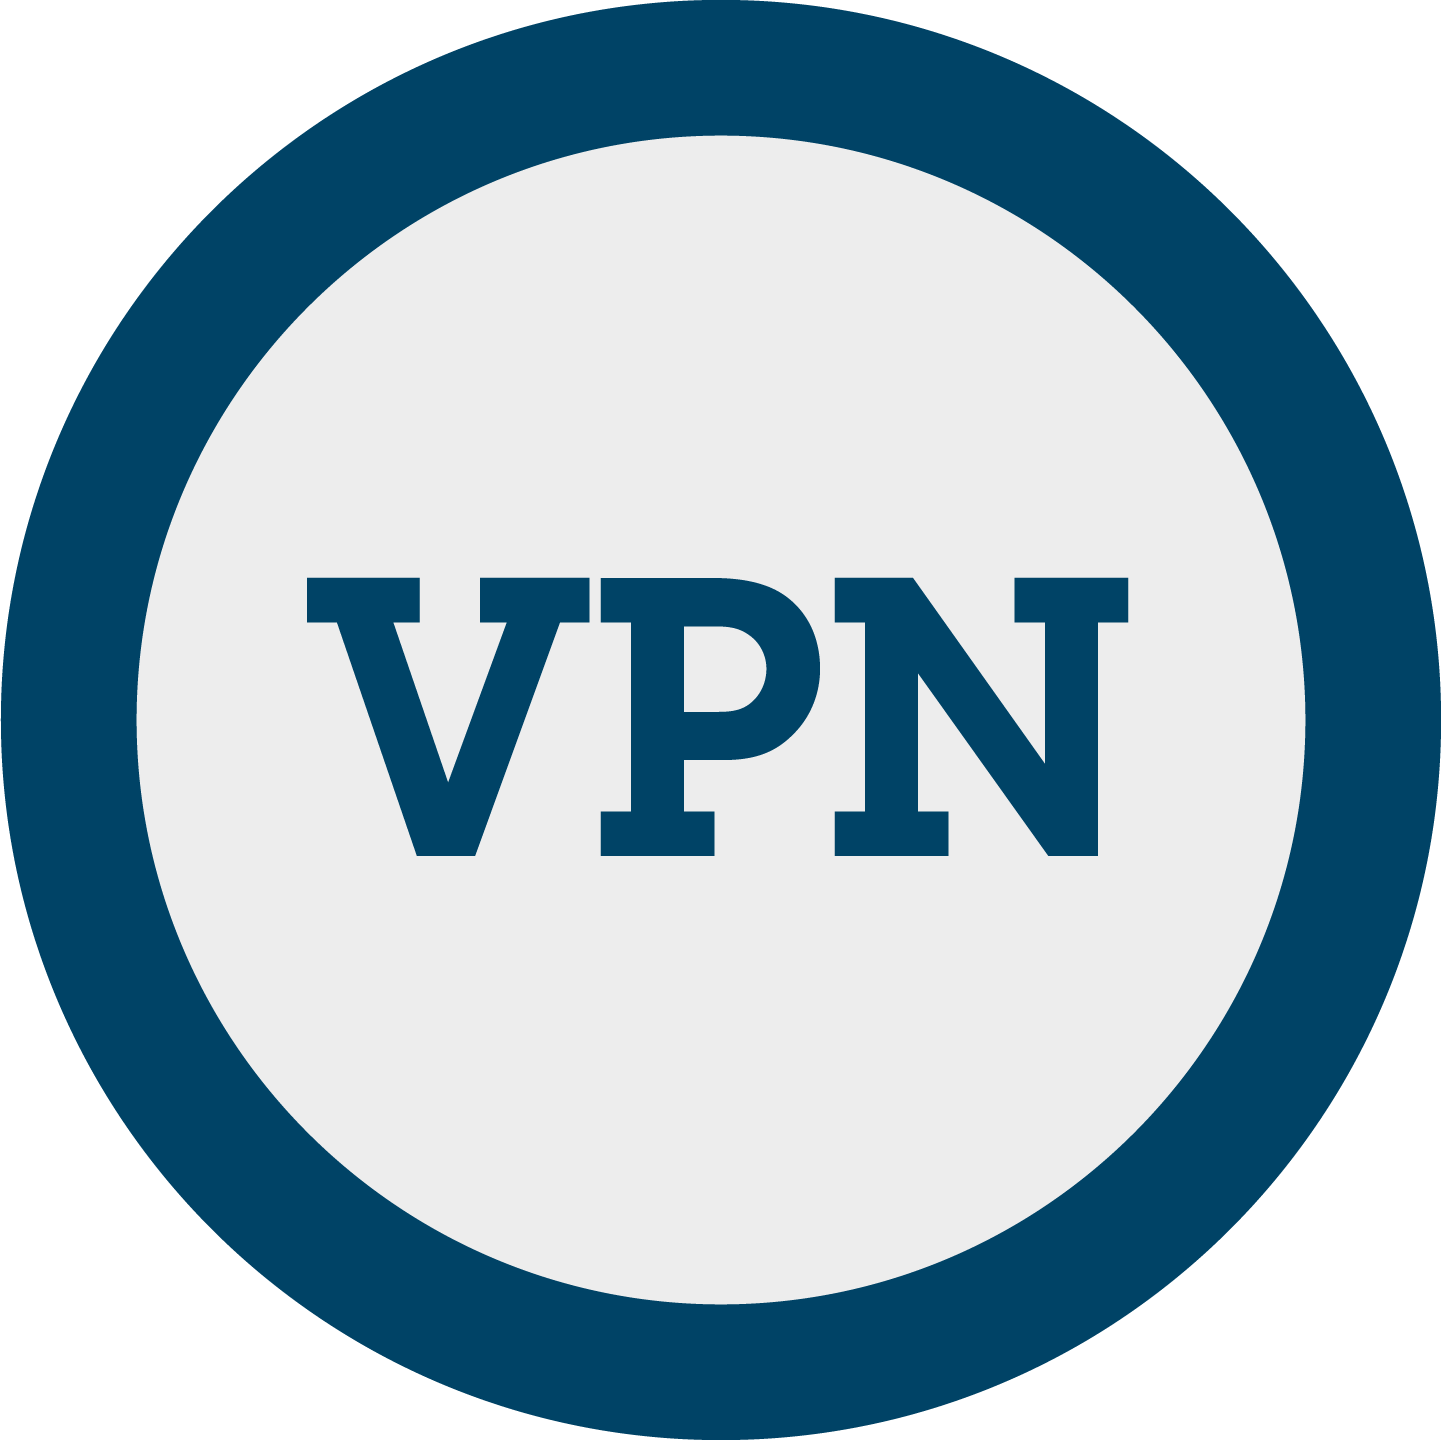 What is VPN and How You Use VPN in Windows PC